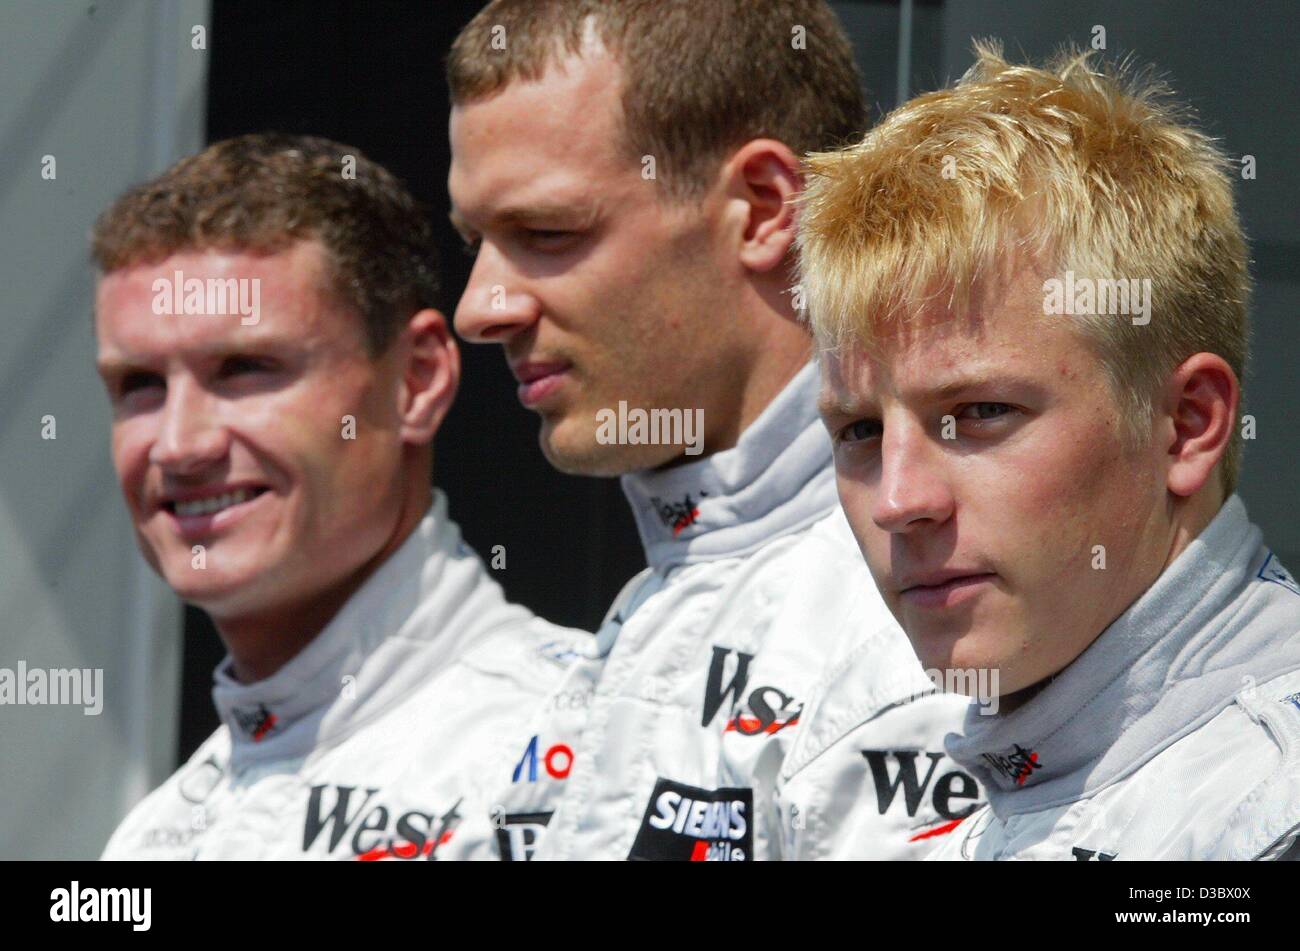 (dpa) - McLaren-Mercedes team members, (L-R:) Scotland's David Coulthard, test driver Alexander Wurz of Austria and Kimi Raeikkoenen of Finland, pose for the photographers at the Hungaroring circuit near Budapest, Hungary, 22 August 2003. McLaren-Mercedes will start with that same team in 2004. Stock Photo